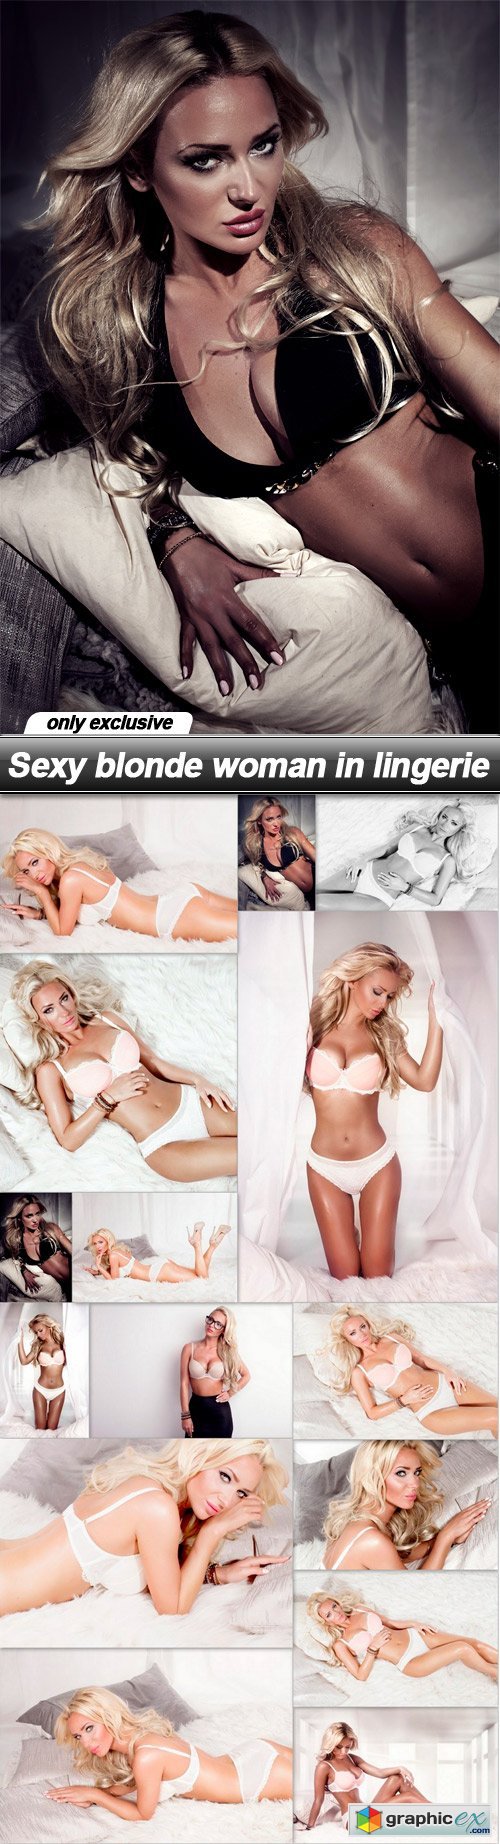 Sexy blonde woman in lingerie - 15 UHQ JPEG